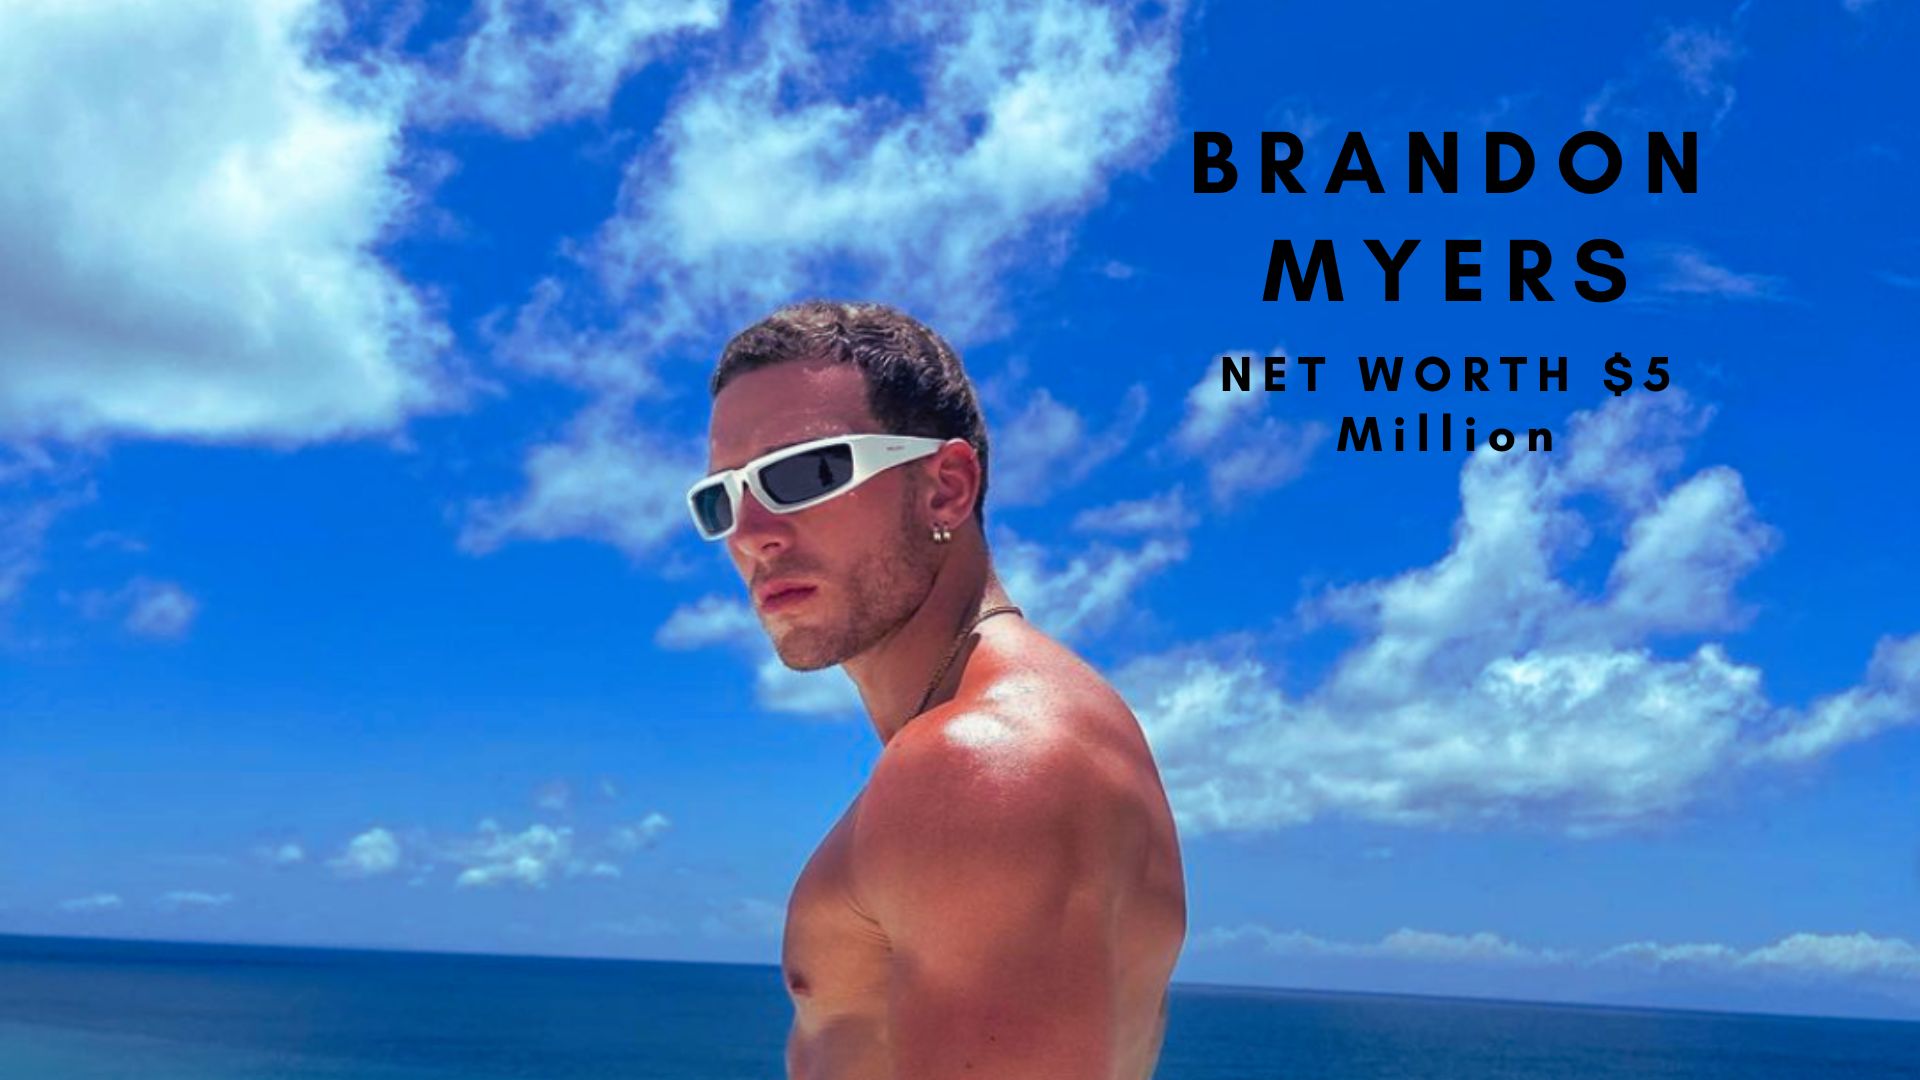 Brandon Myers is a British reality TV personality who rose to fame in 2016. (Credits: @brandonpmyers Instagram)